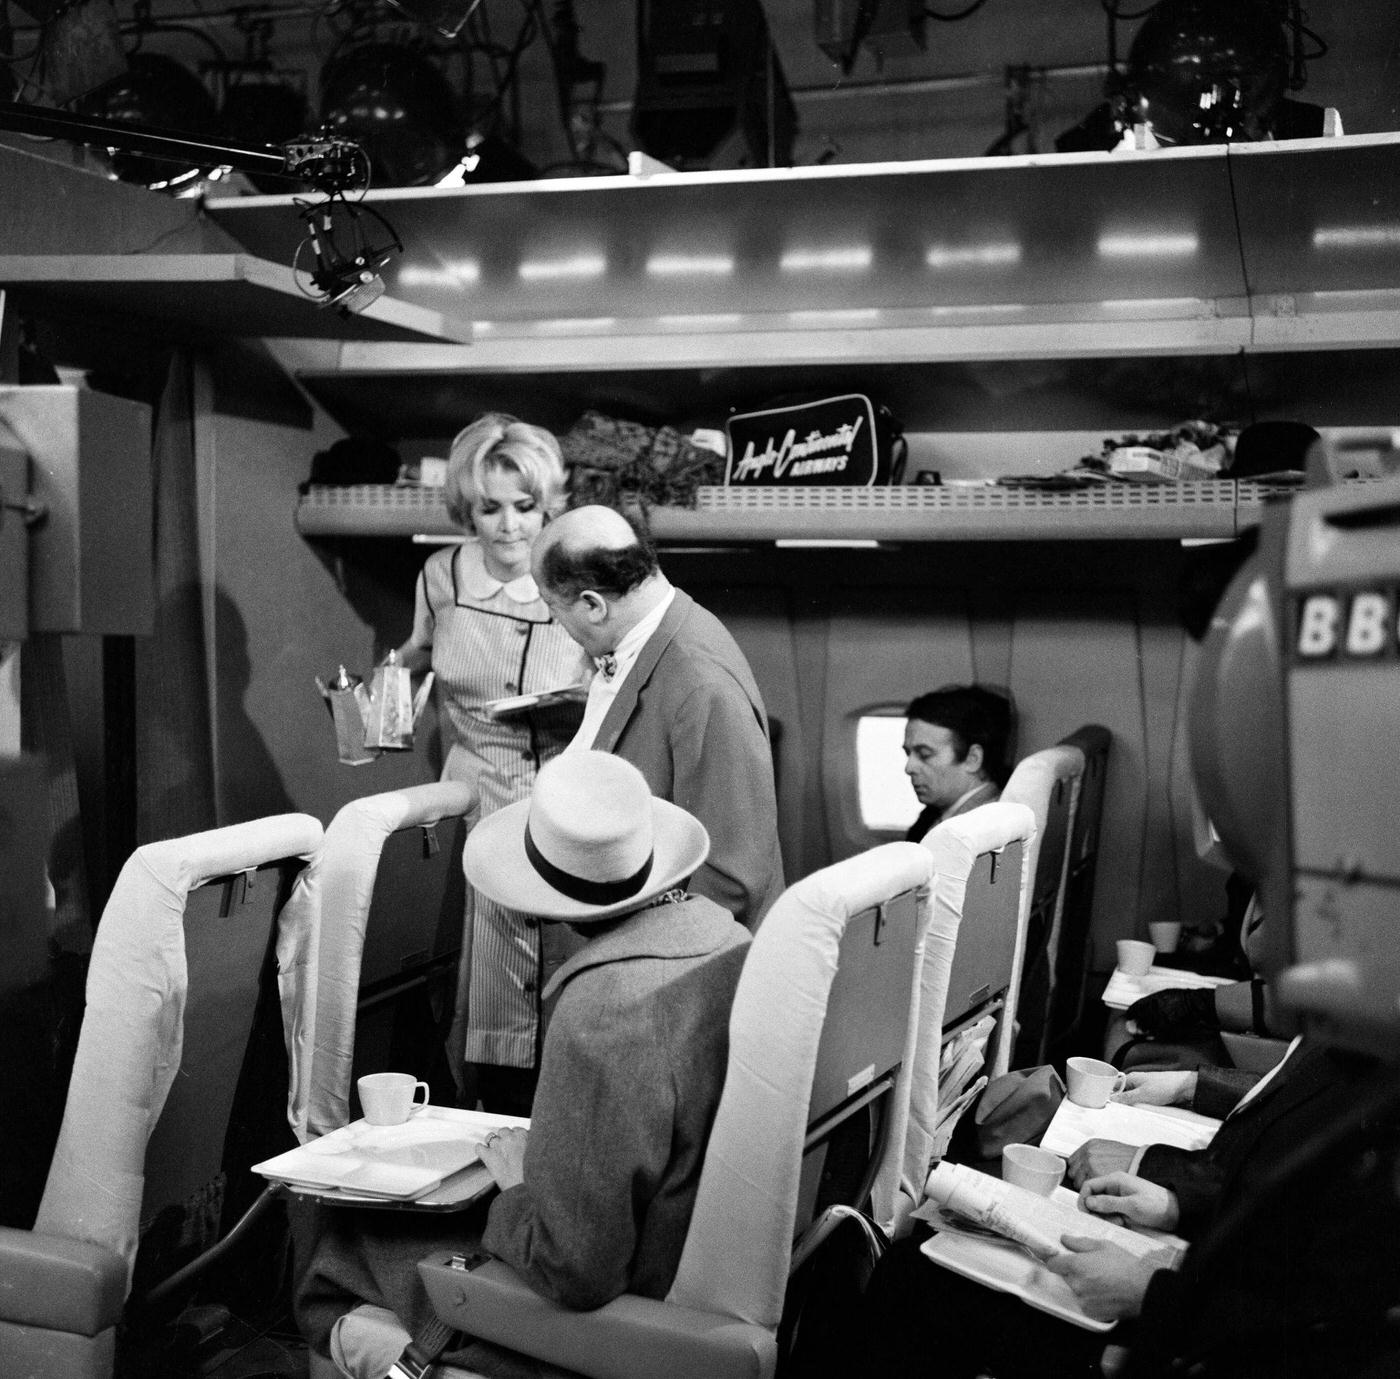 Sheila Hancock playing the role of an air hostess in scenes being shot for the comedy series "The Bed-Sit Girl" at BBC Studios on February 21, 1965.